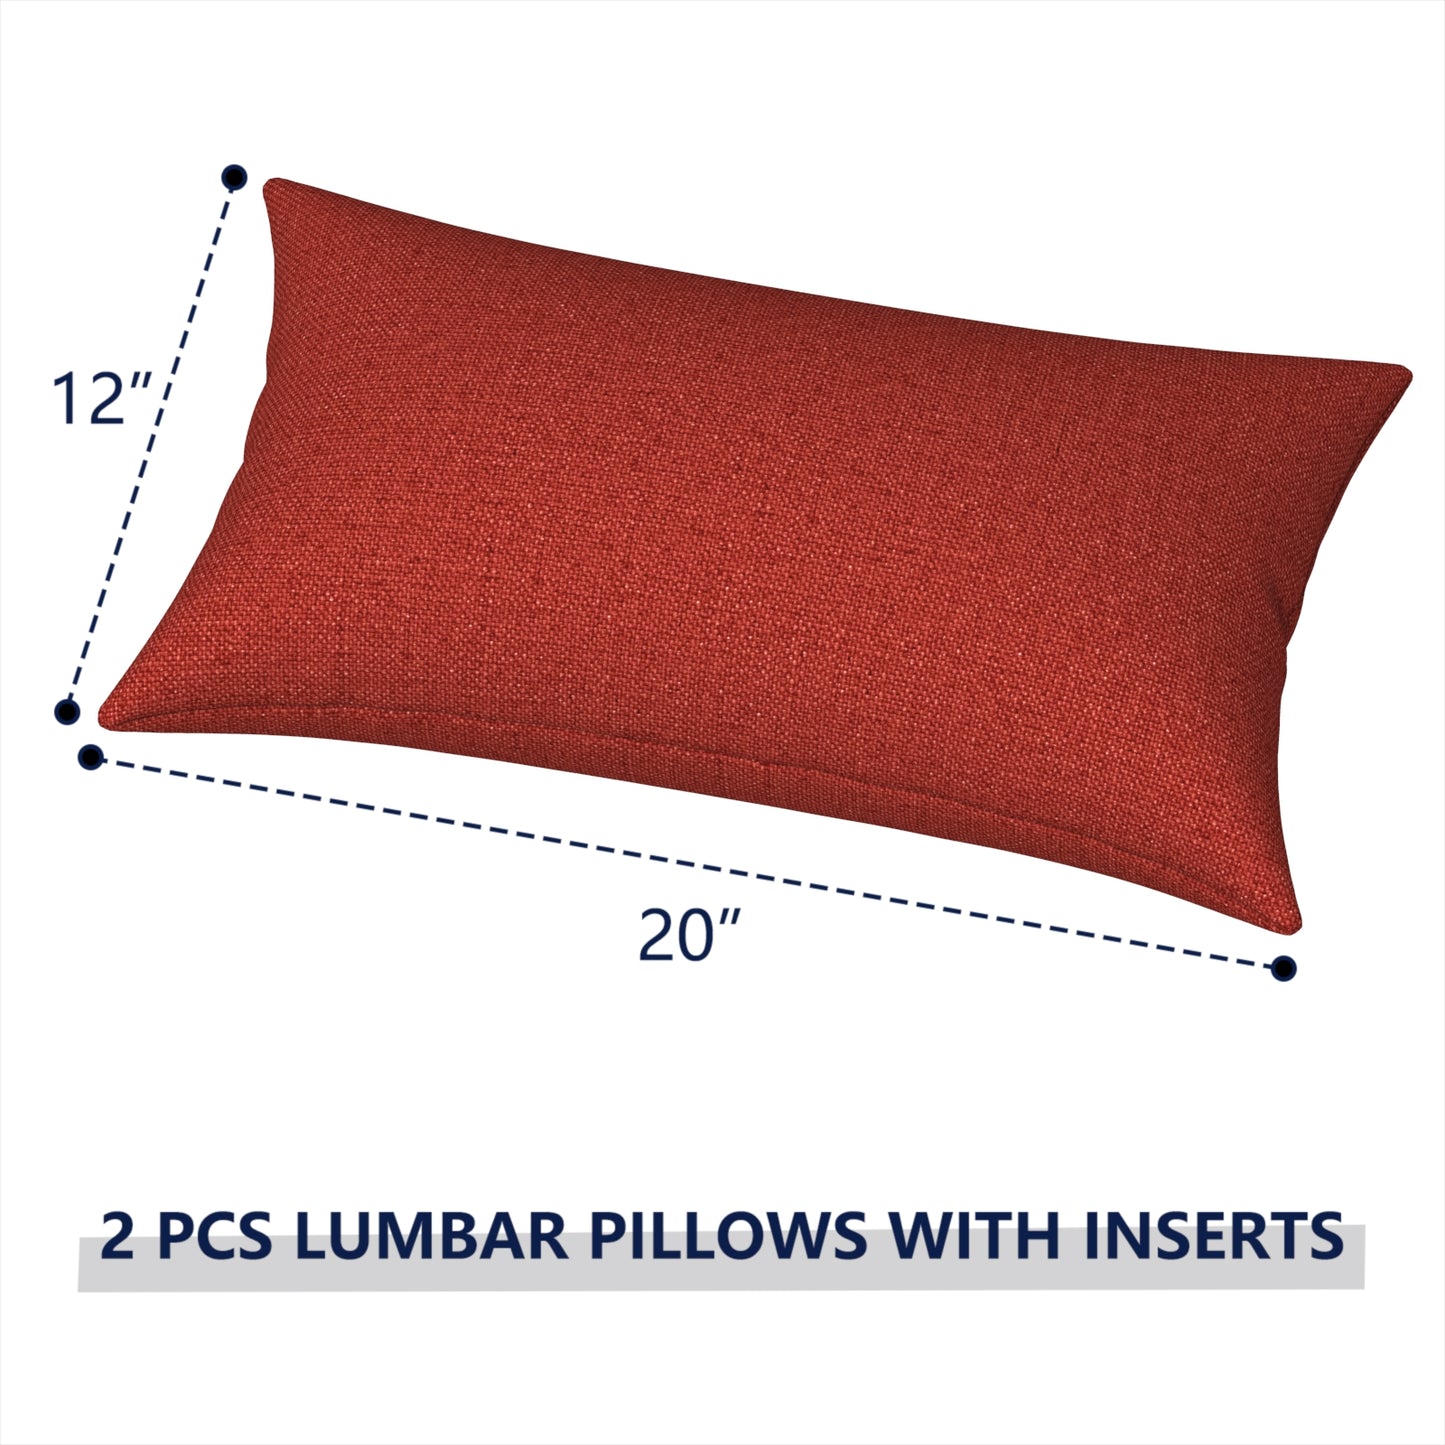 Melody Elephant Outdoor/Indoor Lumbar Pillows, Water Repellent Cushion Pillows, 12x20 Inch, Outdoor Pillows with Inserts for Home Garden, Pack of 2, Brick Red